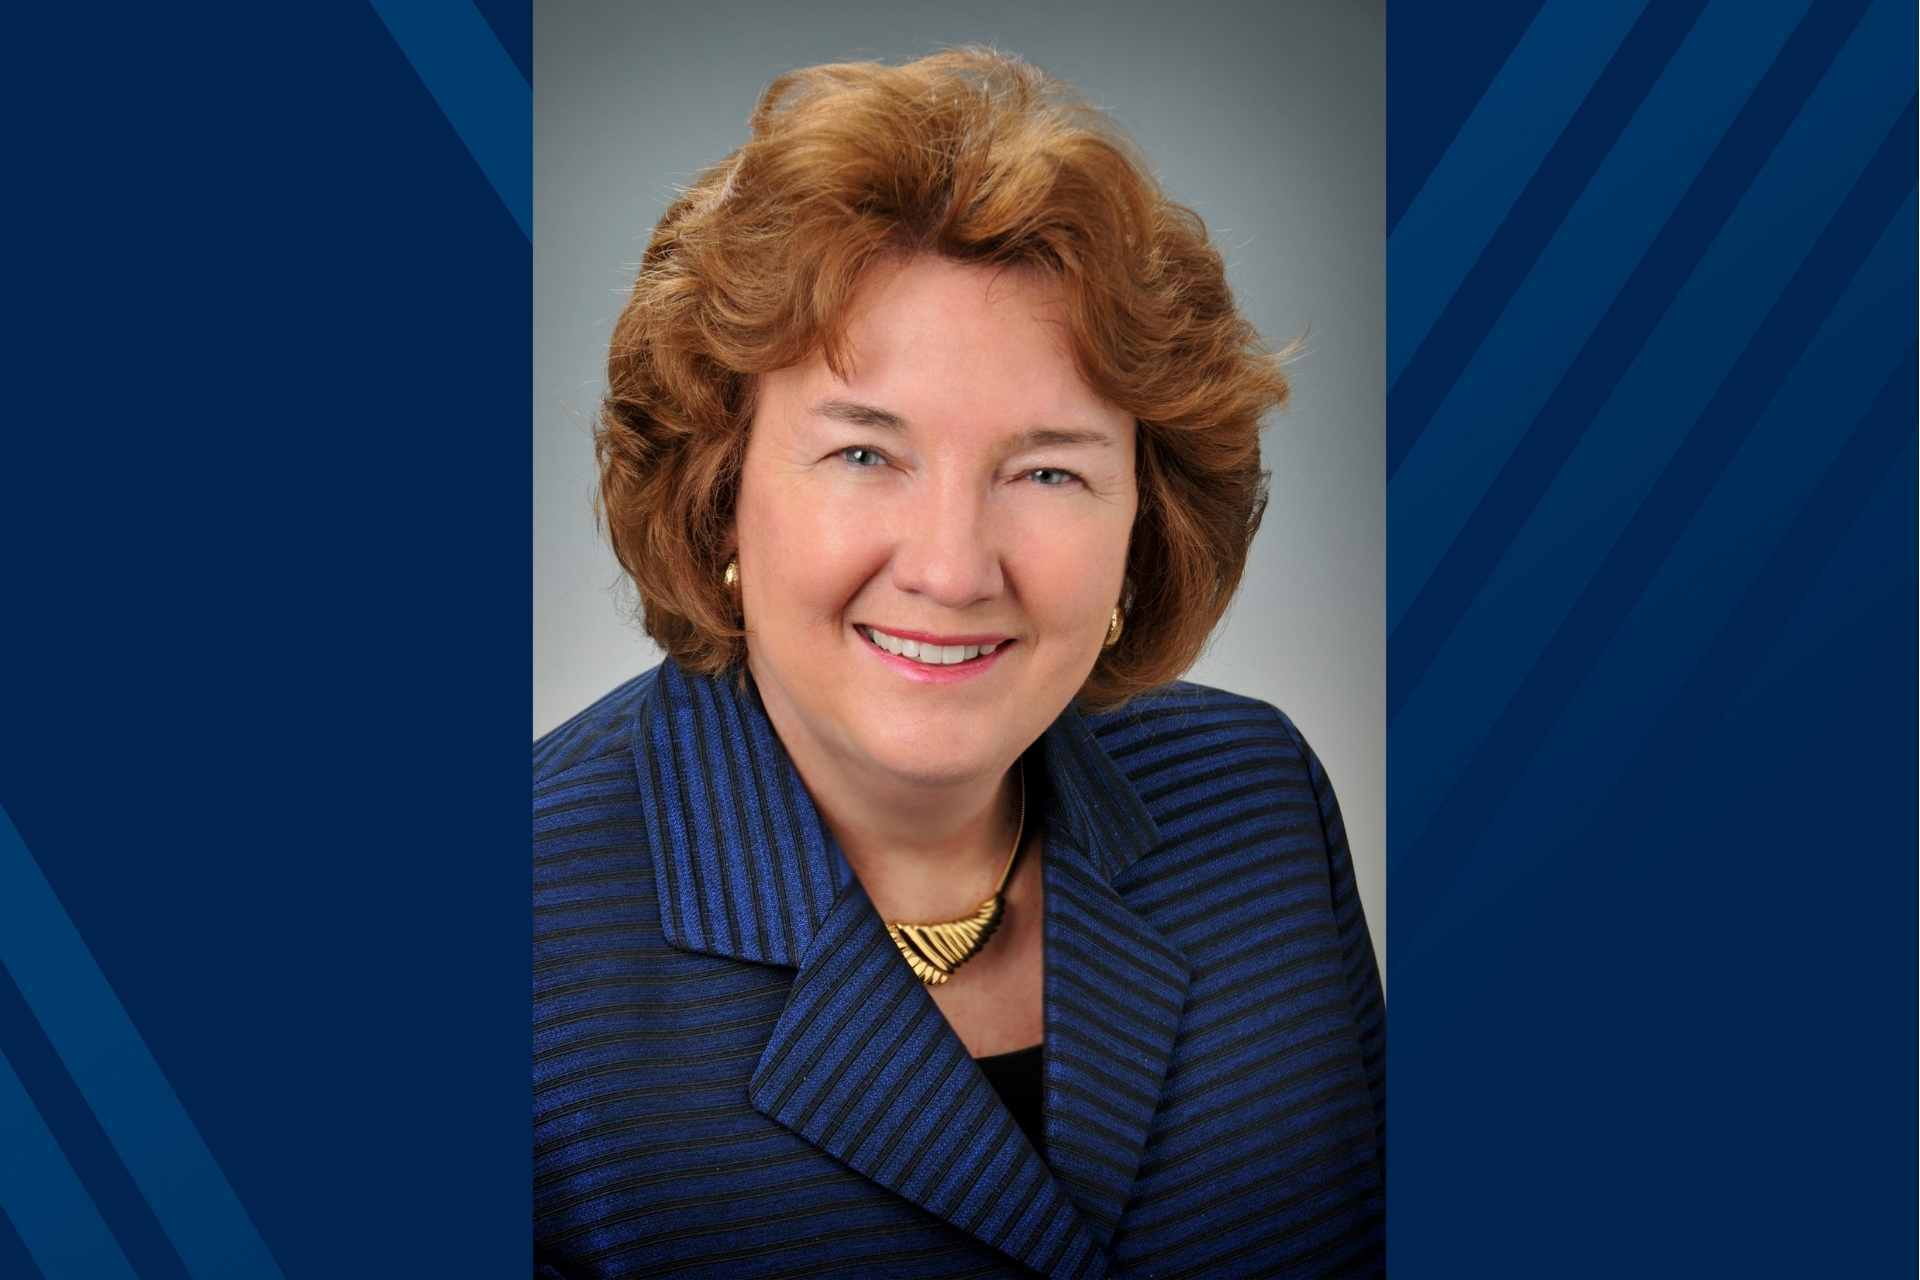 WVU Tech President Carolyn Long will retire at the end of this year. (WVU Photo)